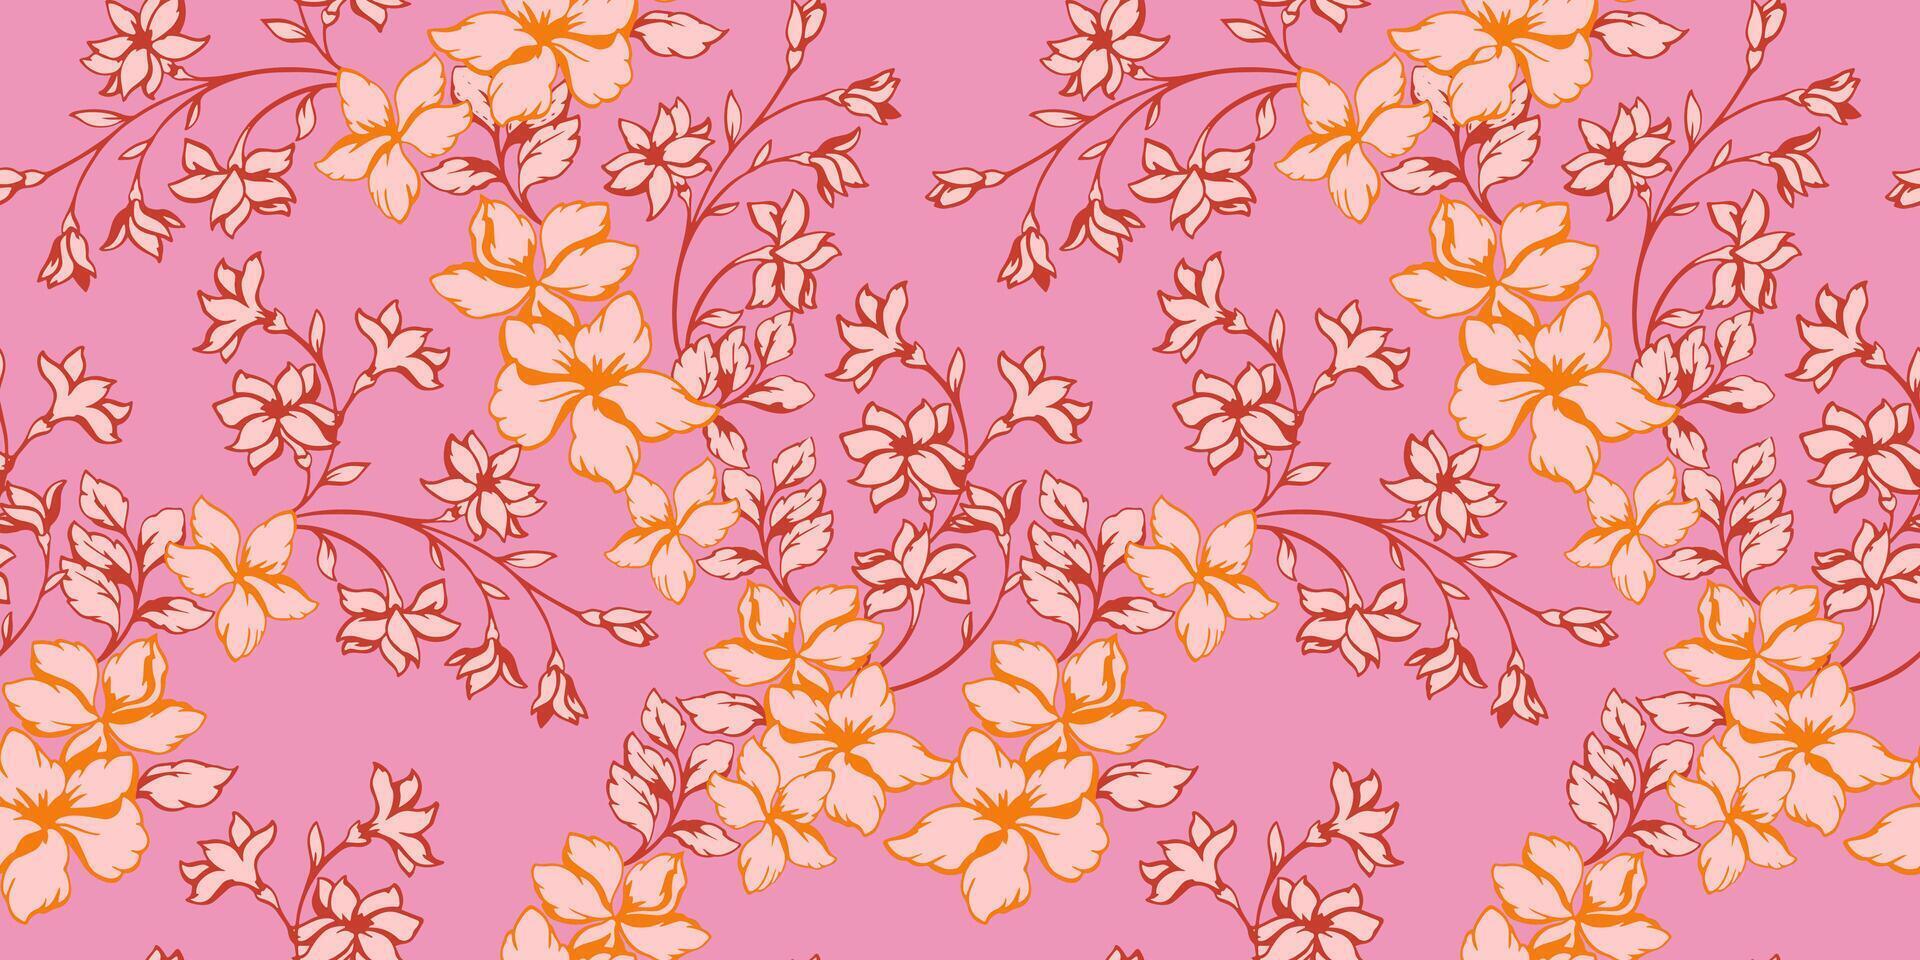 Blooming abstract artistic branches wild flowers seamless pattern. hand drawn. Monotone pink stylized floral stems background. Collage template for printing, patterned, textile, fabric vector